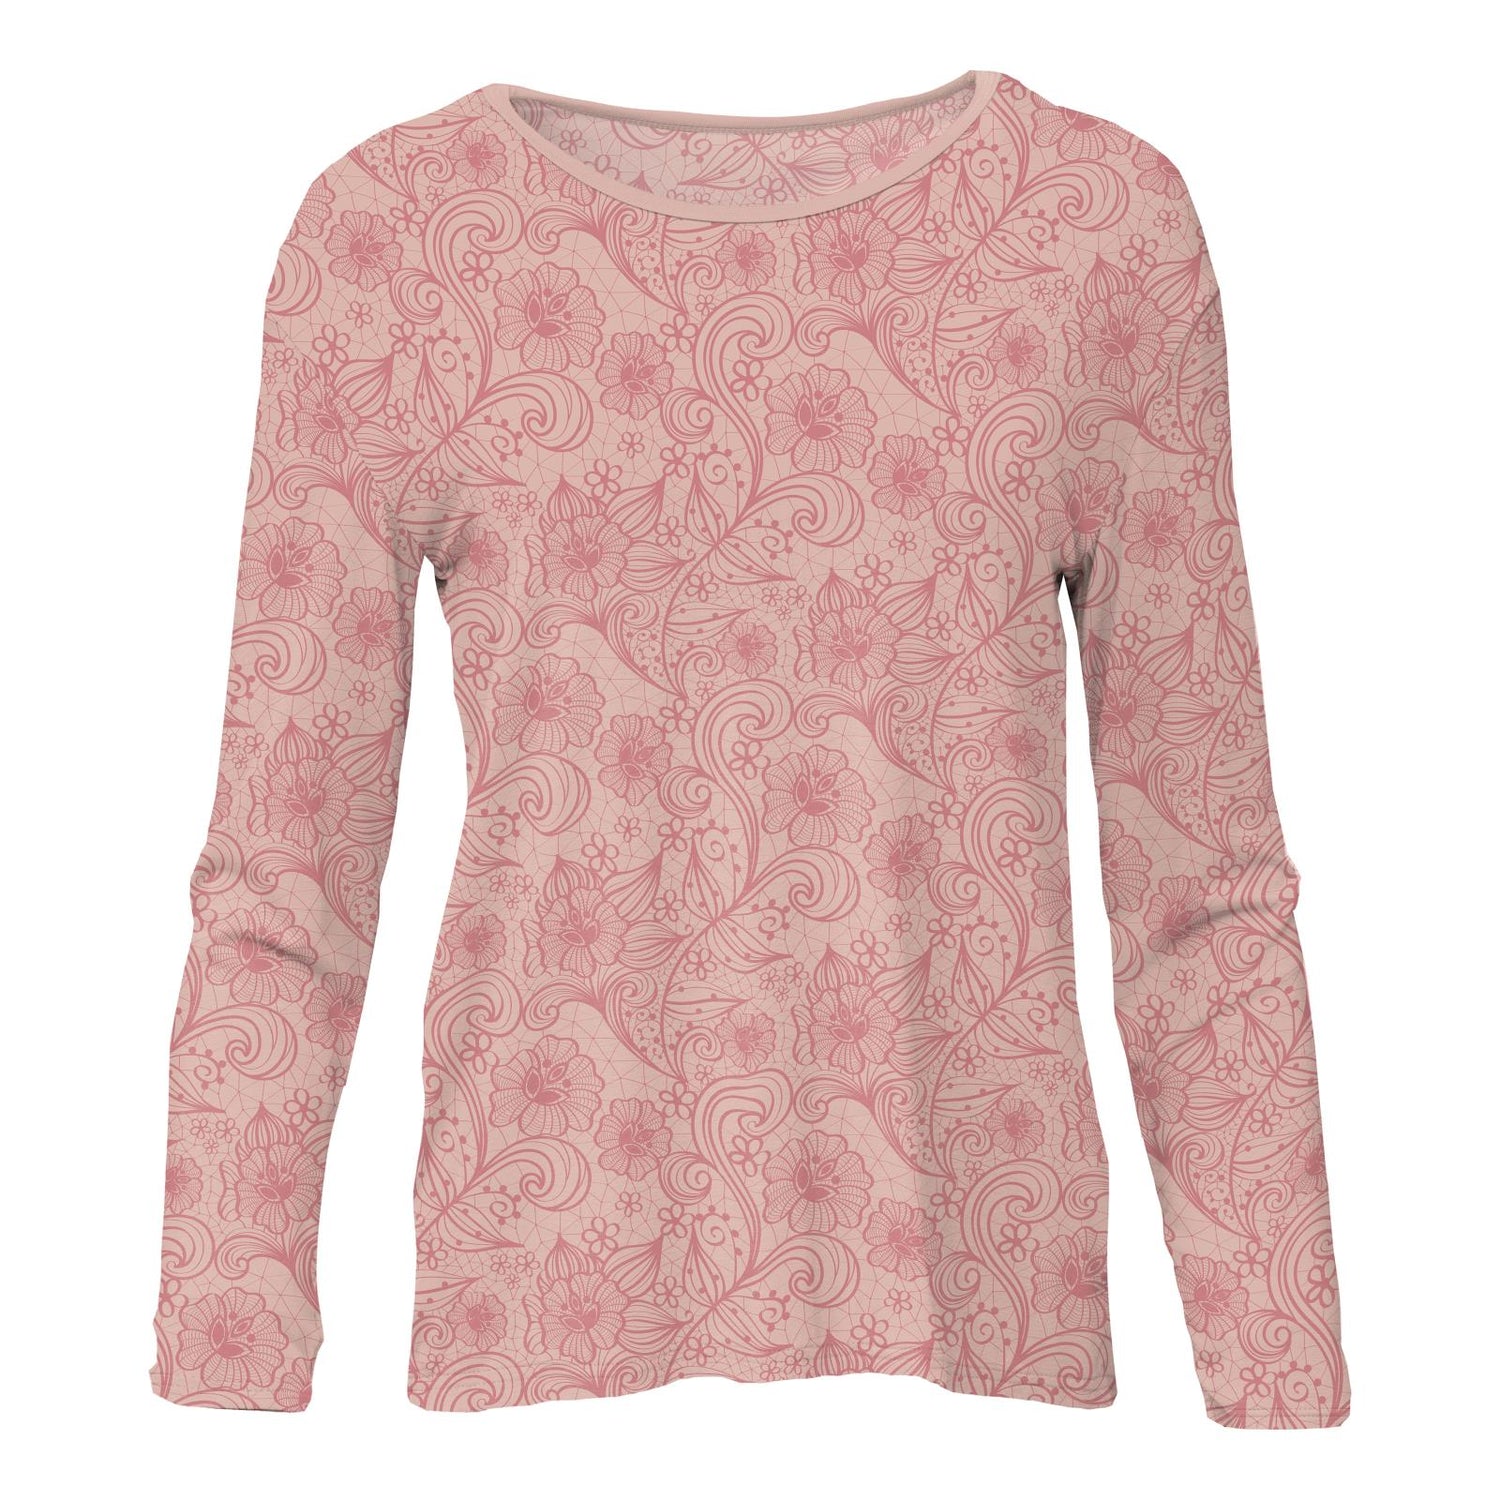 Women's Print Long Sleeve Butterfly Open-Back Top in Peach Blossom Lace